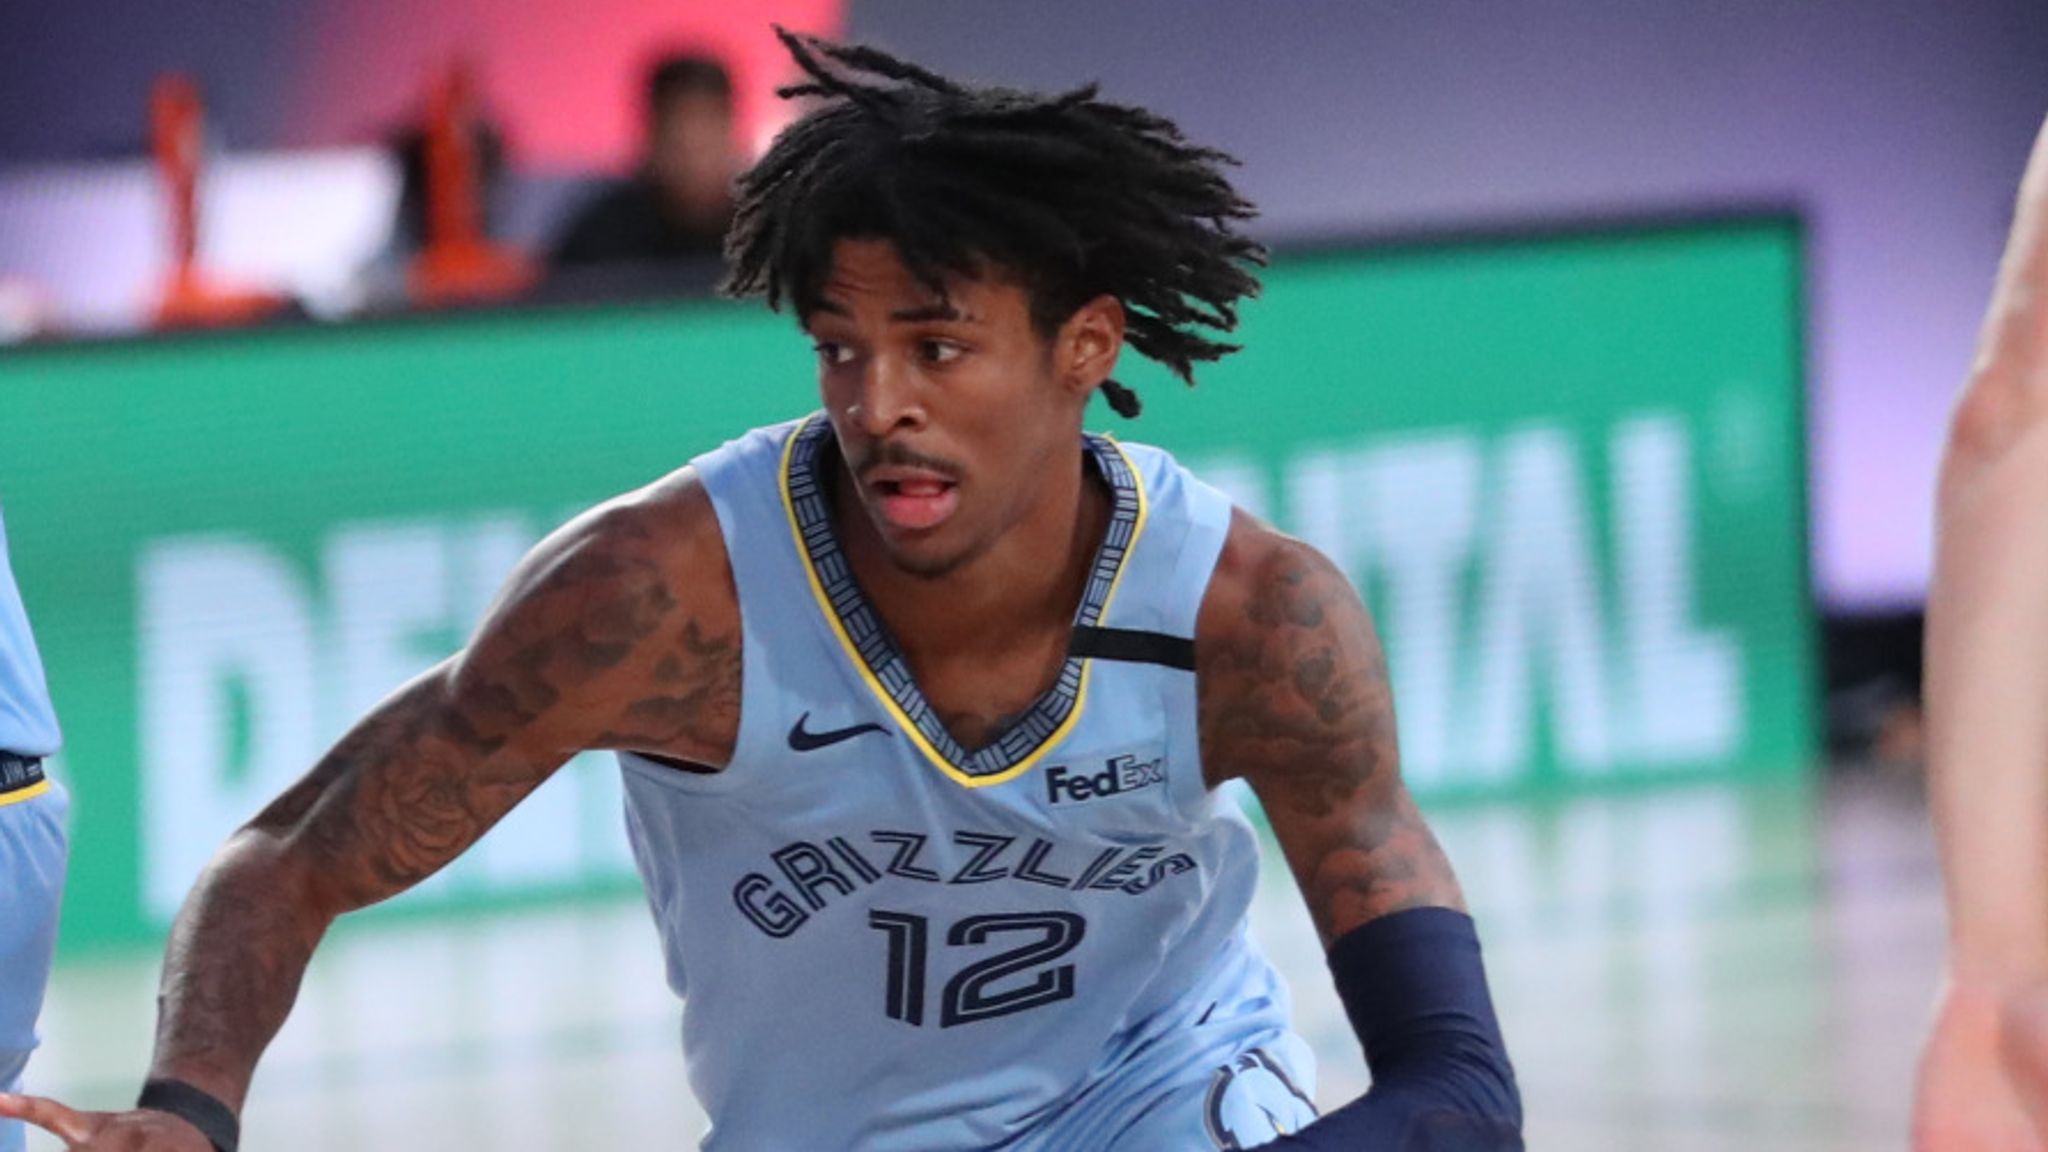 Ja Morant named 2019-20 NBA Rookie of the Year; Grizzlies star